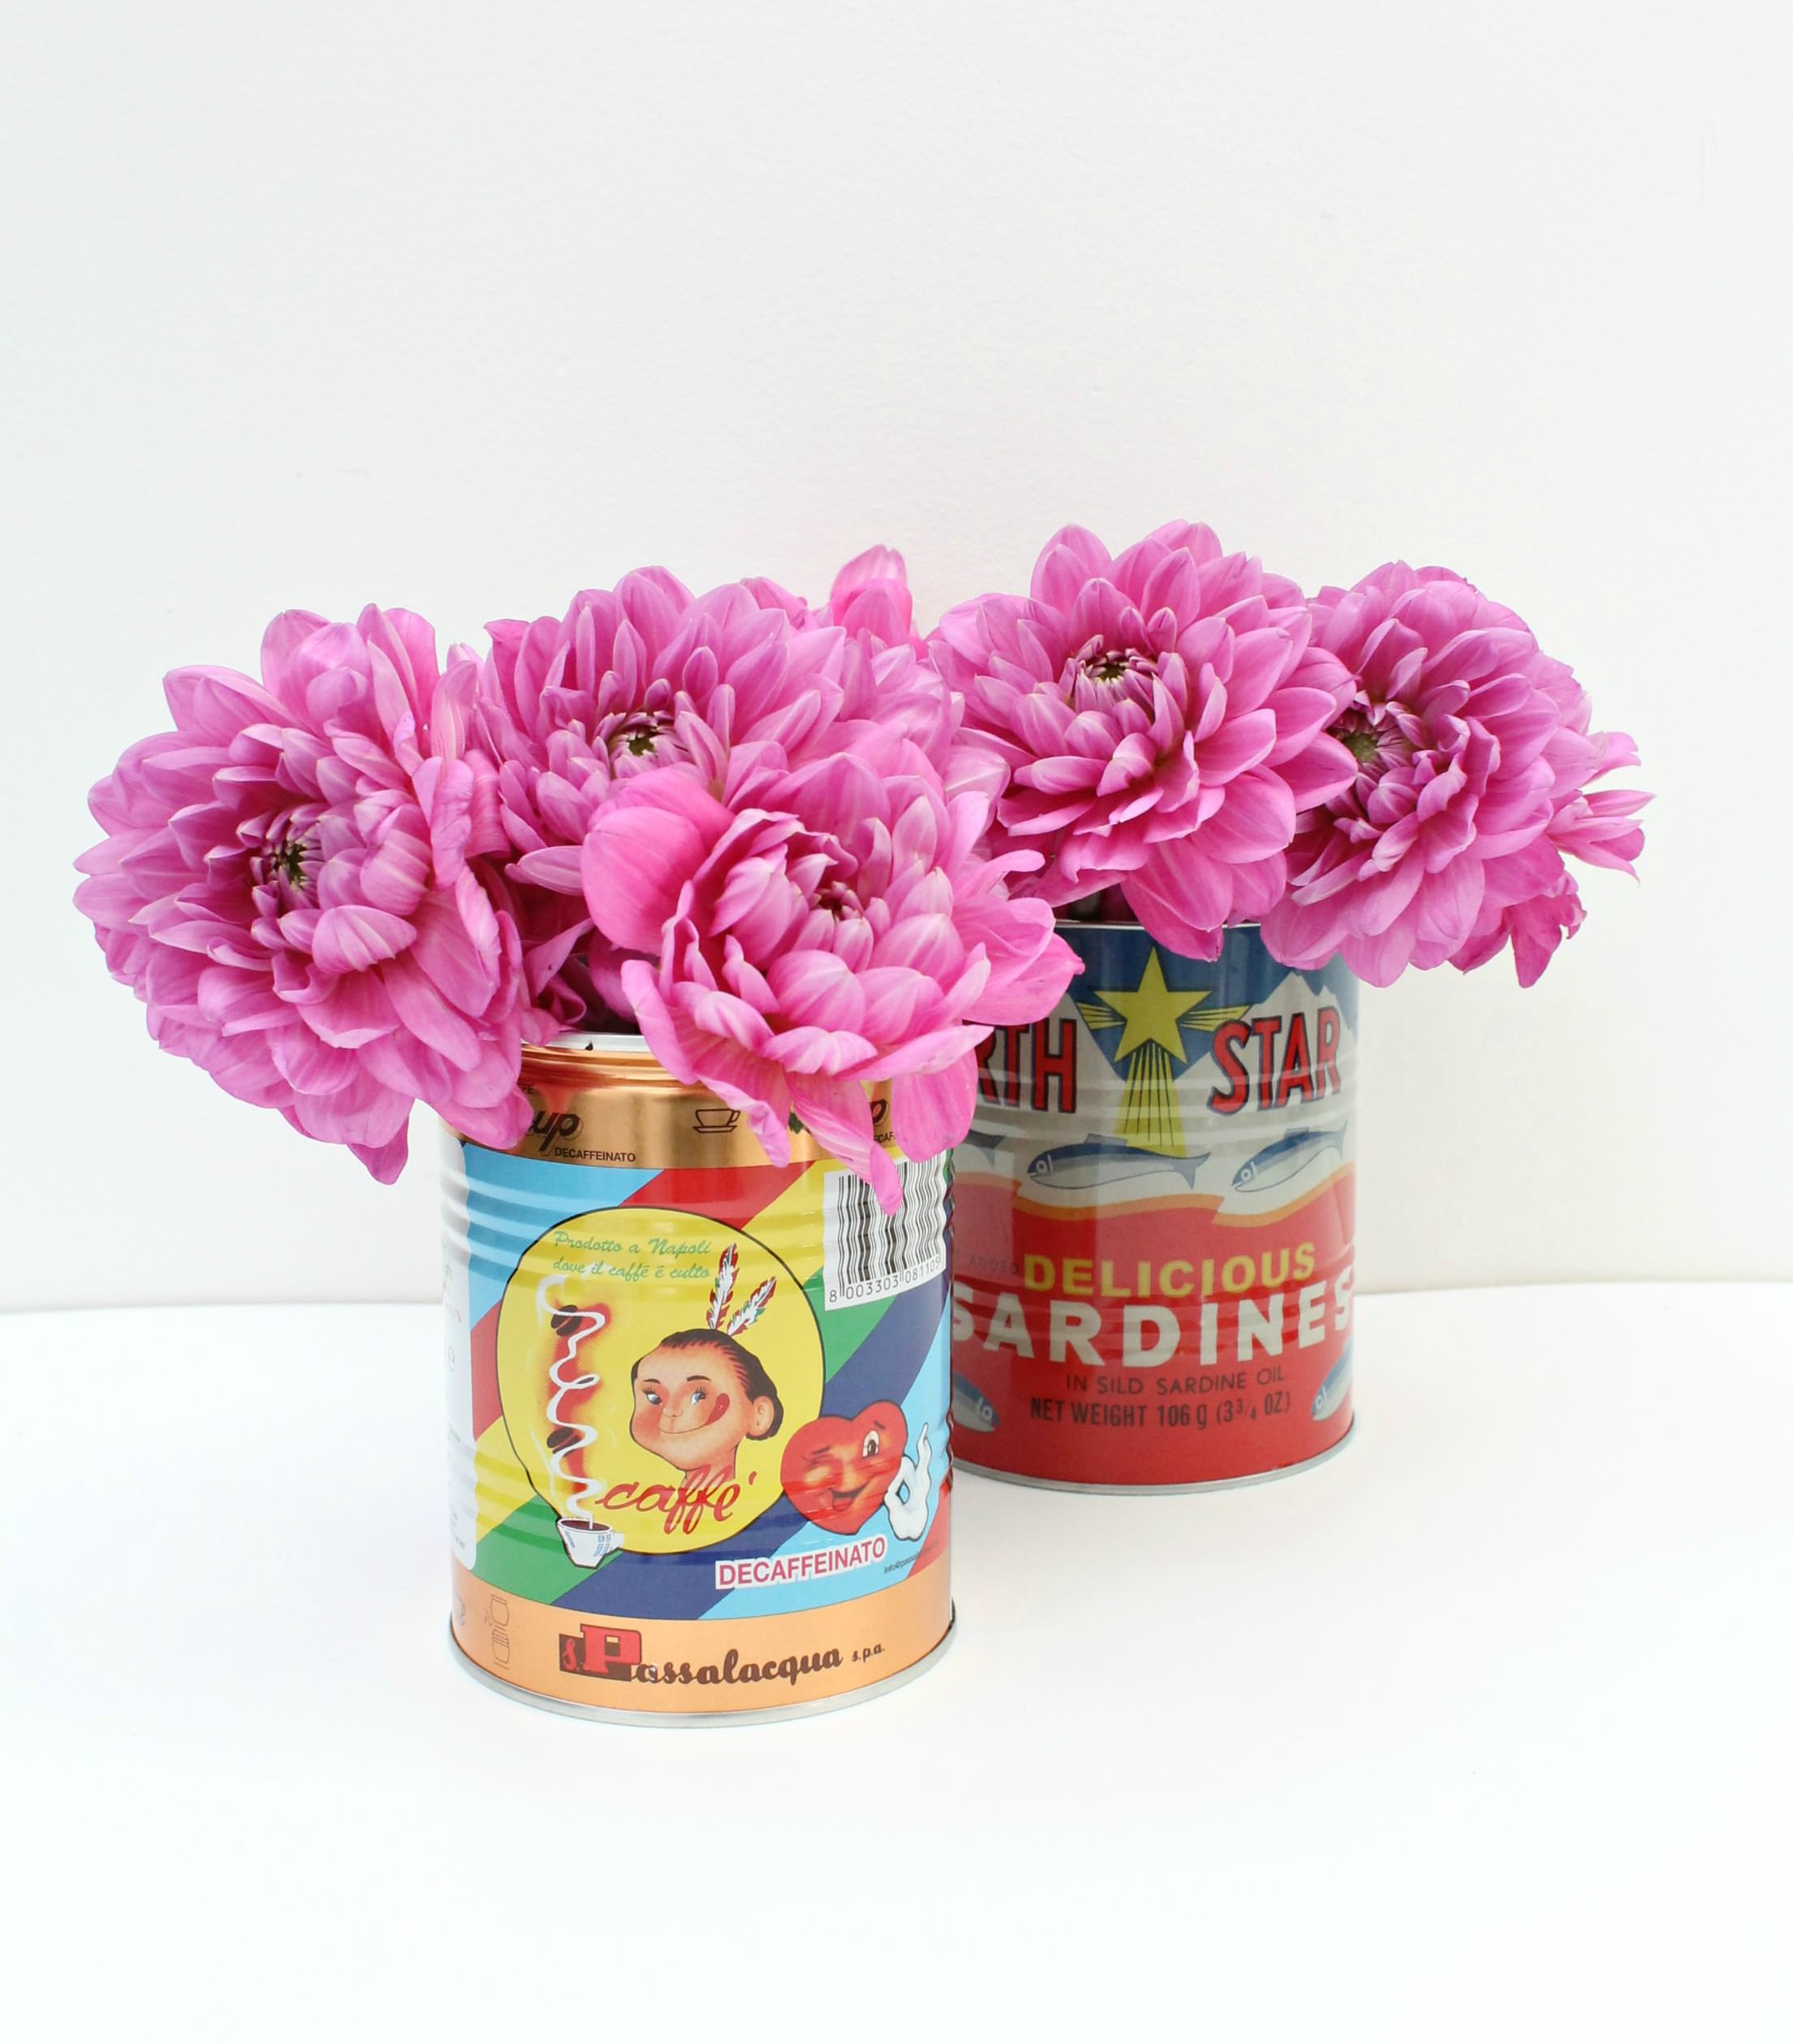 recycling-colourful-tins-1-as-vases-by-geraldine-tan-little-big-bell